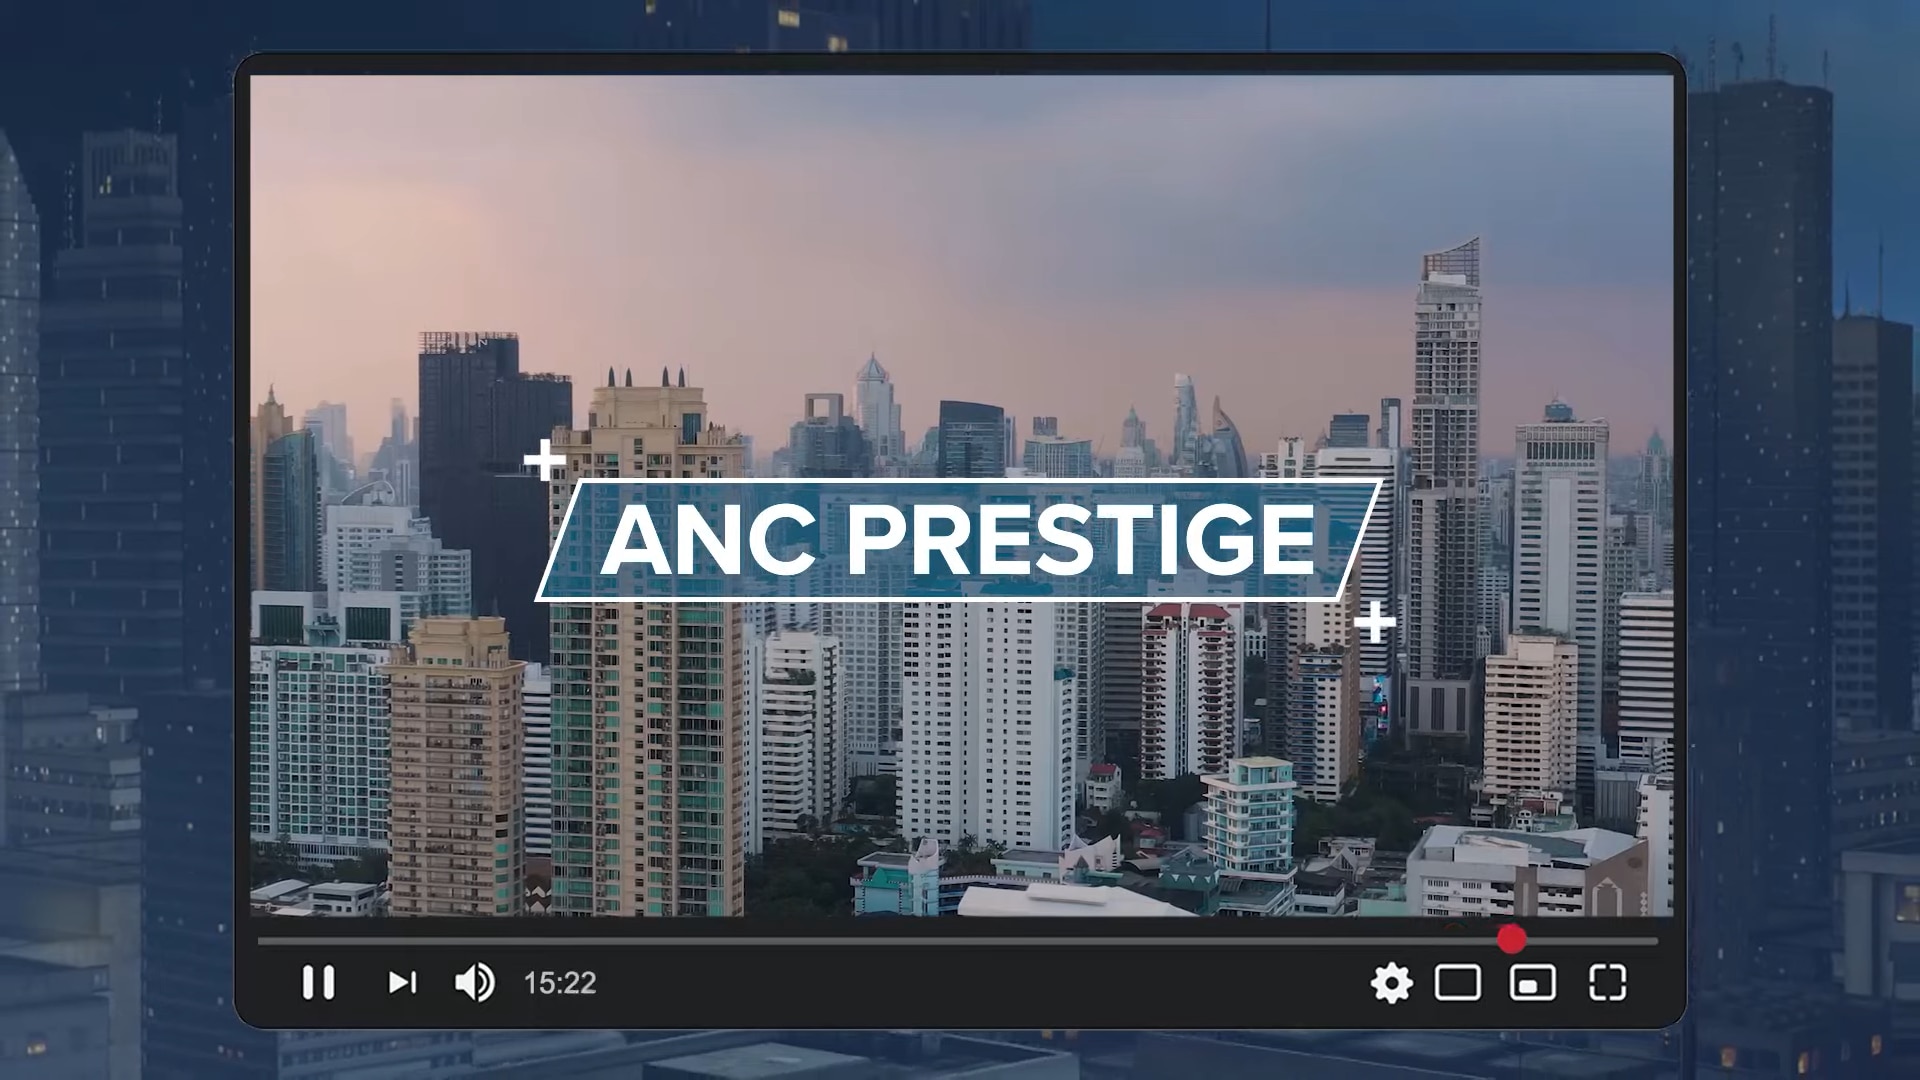 Full ANC livestream now available via member subscription on YouTube